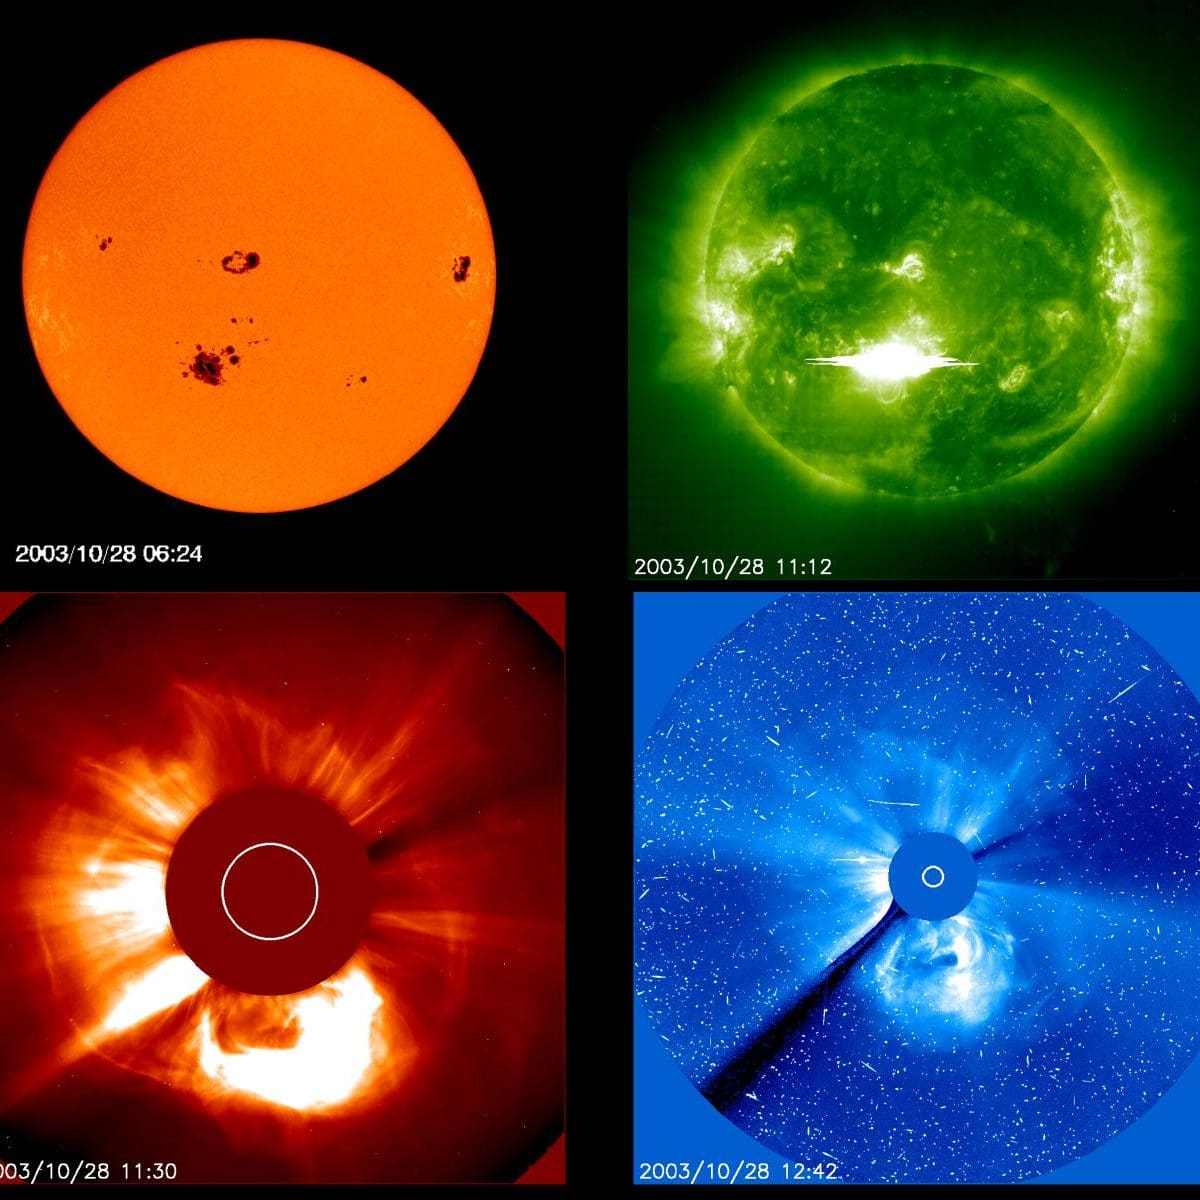 X17 Solar Flare and Solar Storm of October 28, 2003 - See more at: https://www.thesuntoday.org/historical-sun/x17-solar-flare-and-solar-storm-of-october-28-2003/#sthash.MVxvGCI4.dpuf